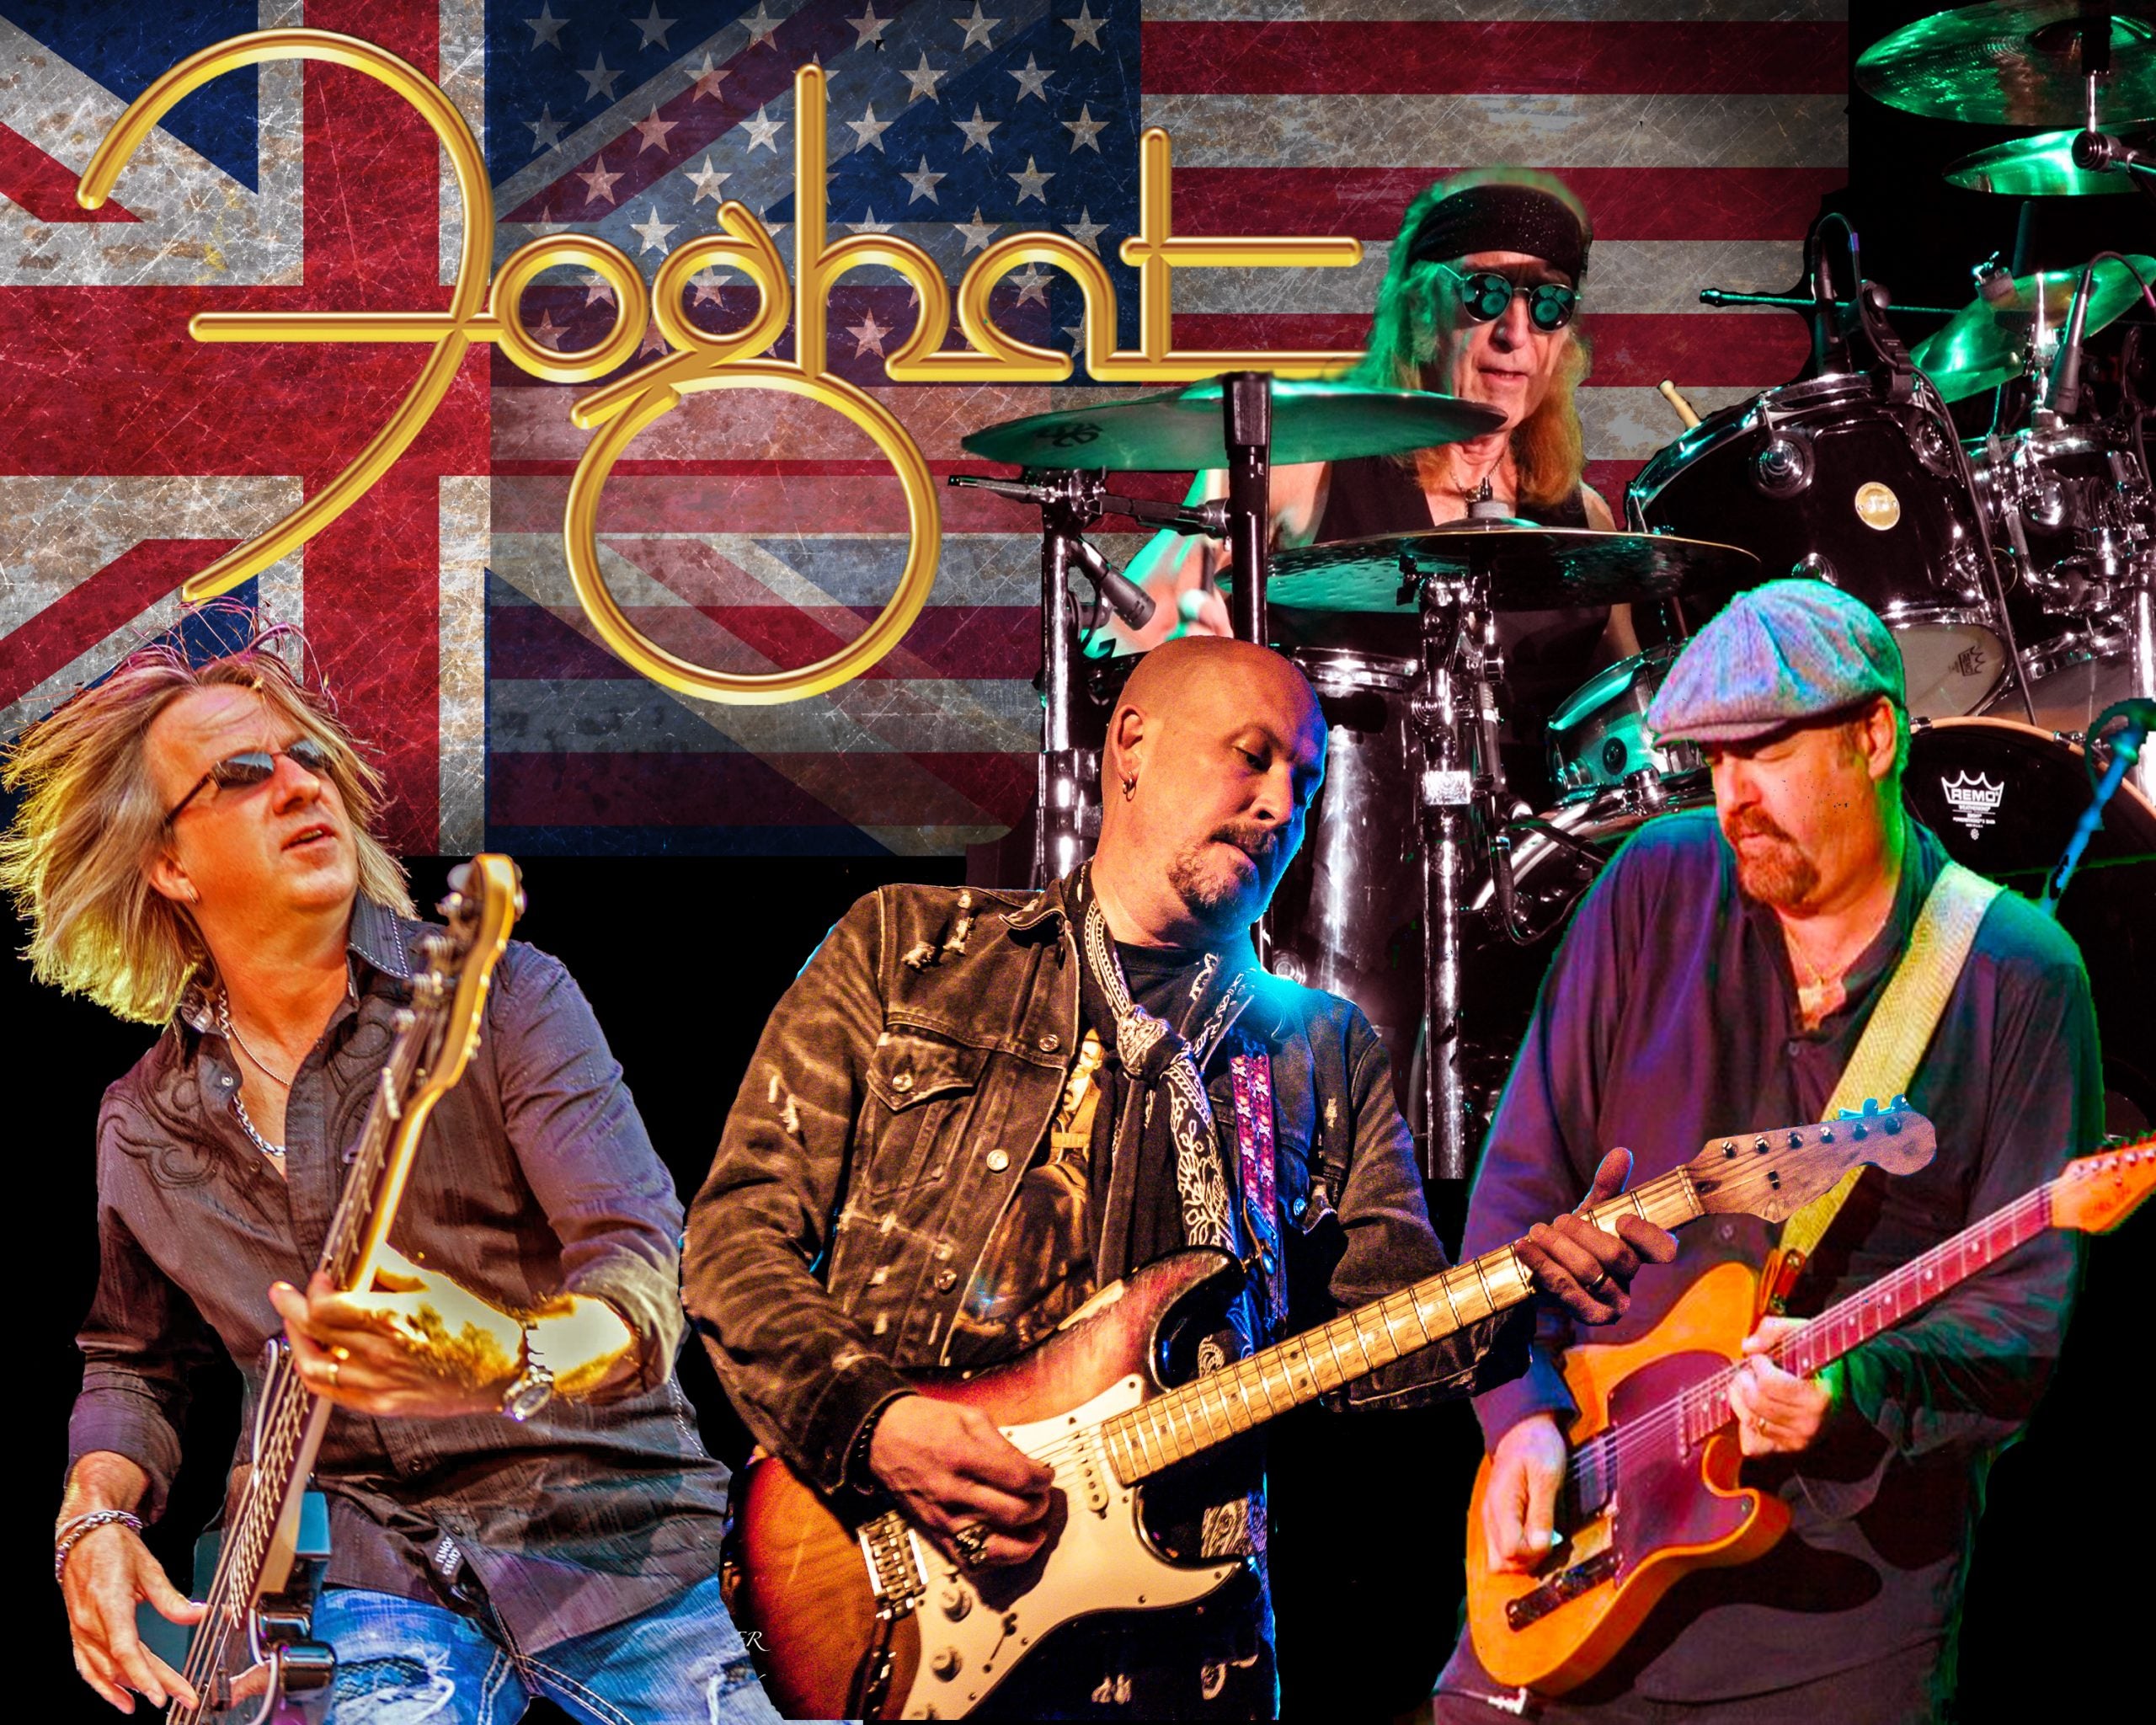 Foghat at Blue Gate Performing Arts Center